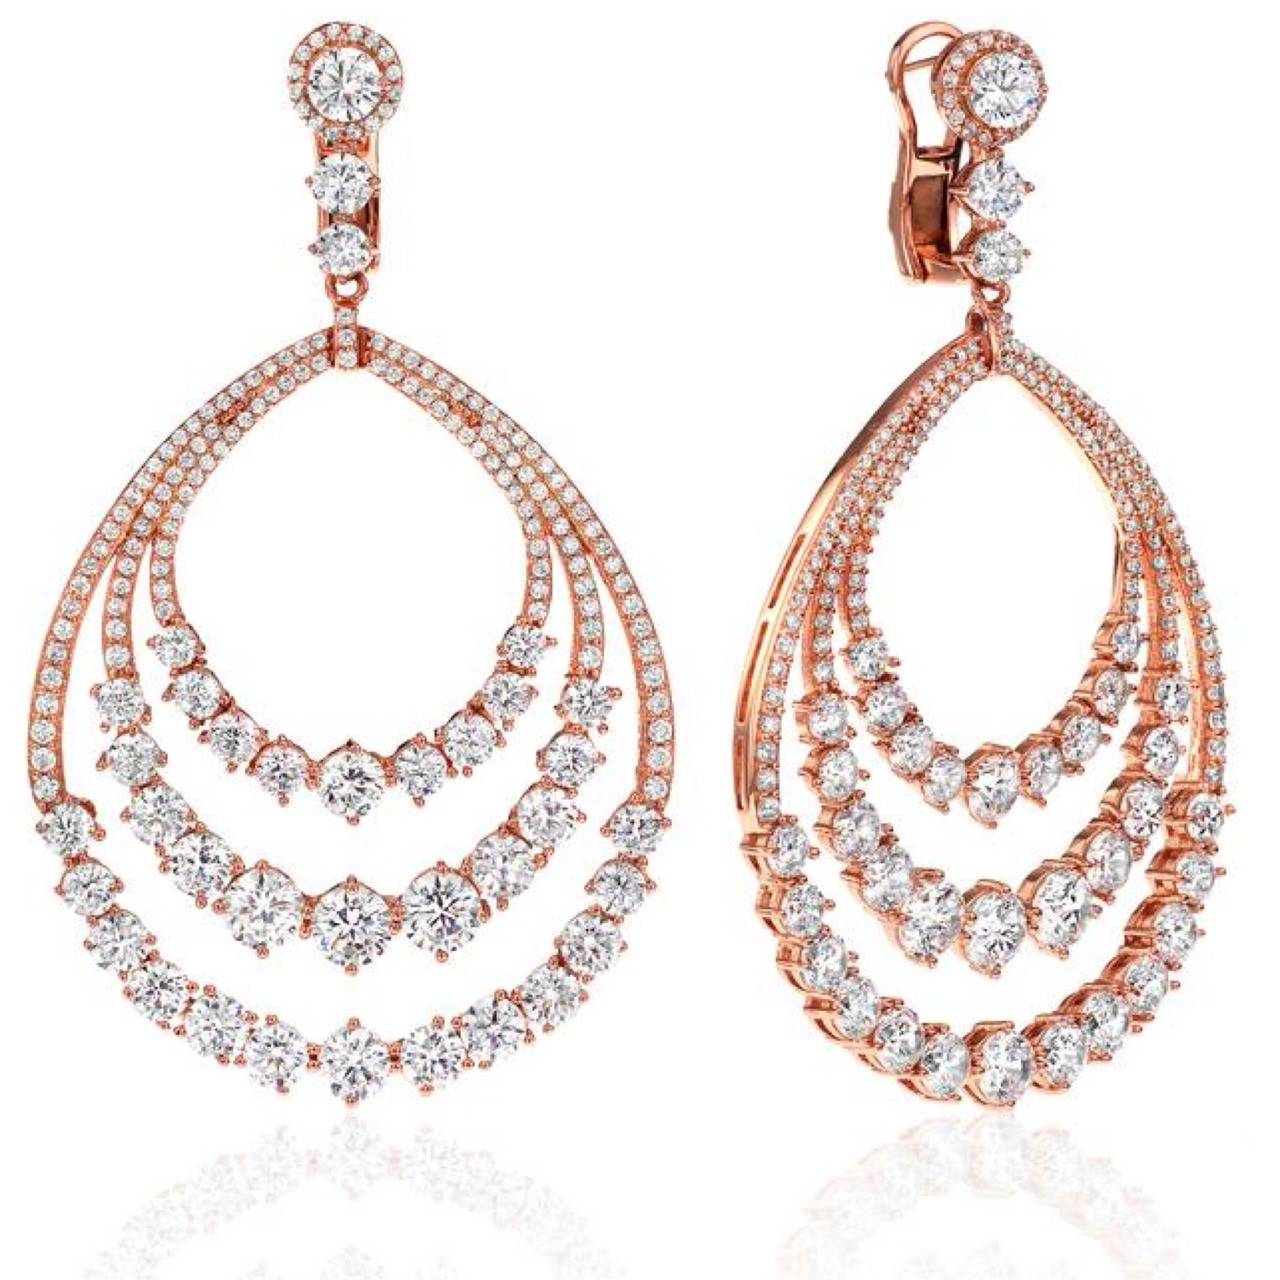 One of a kind Diamond Earrings. Colorless Diamonds/VVS Clarity. The Finest Cut Diamonds Full Of Fire & Brilliance. As Shown There Are Many Large Diamonds In This Earrings From .55ct Each Stone.